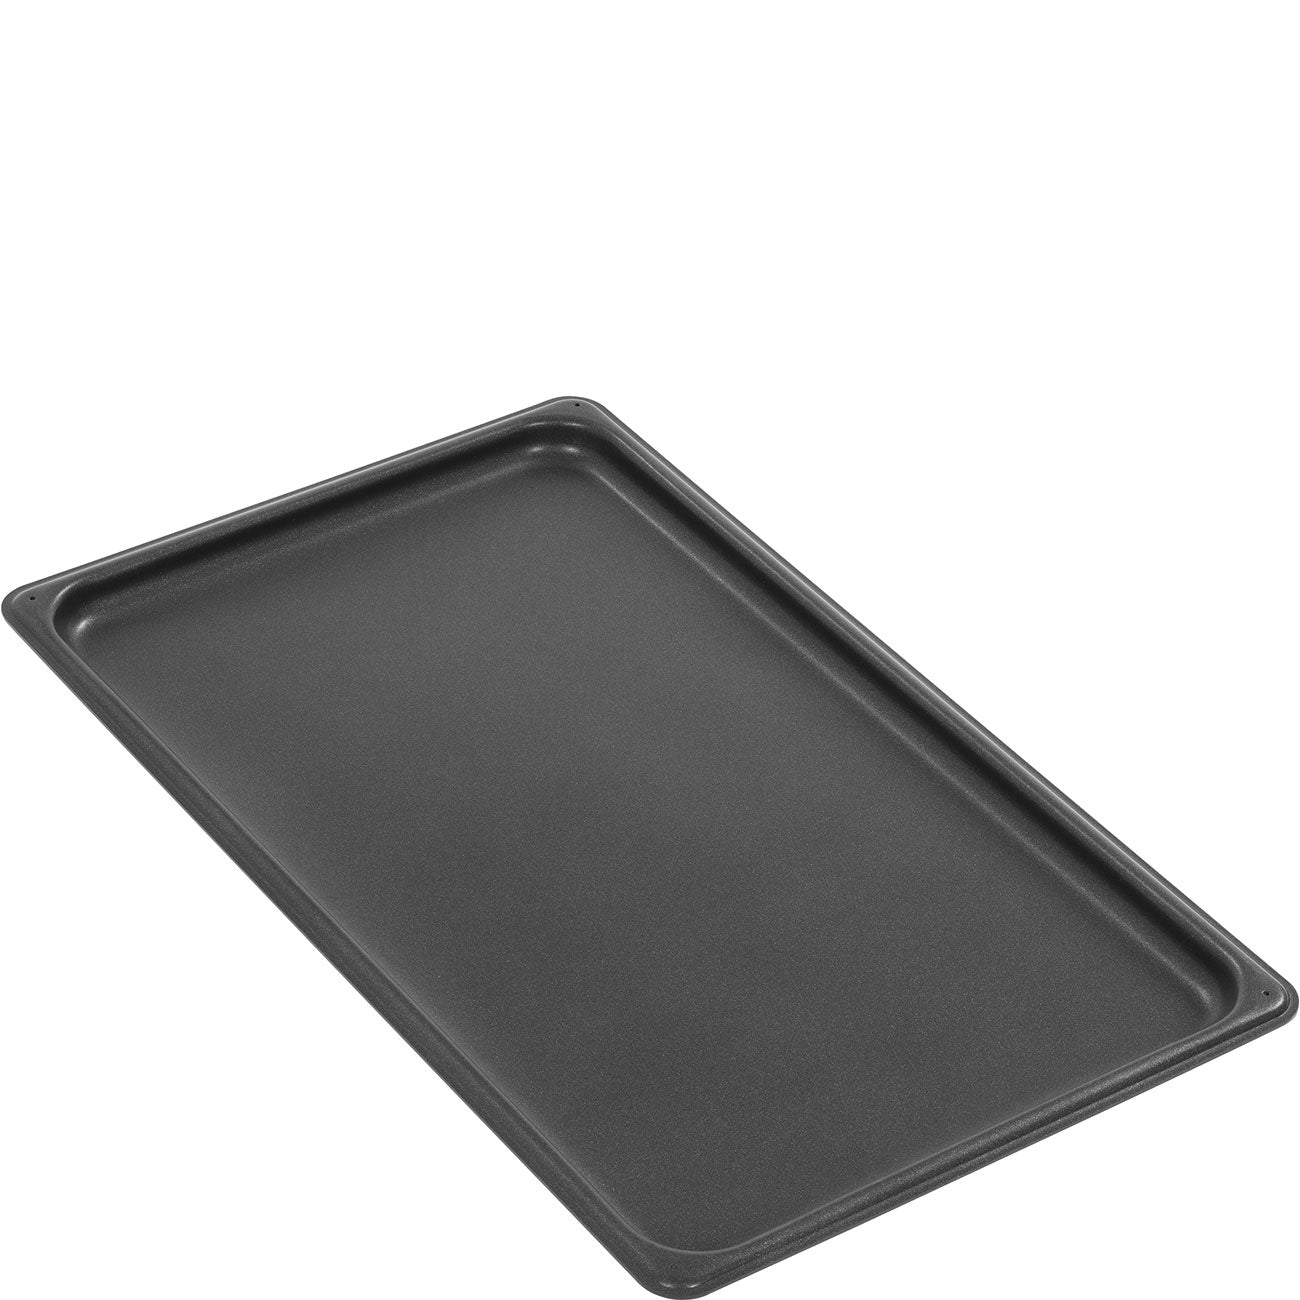 Smeg Combi Oven Tray Non-Stick Tray 1 x 1/1GN 530mm x 325mm T11TH20